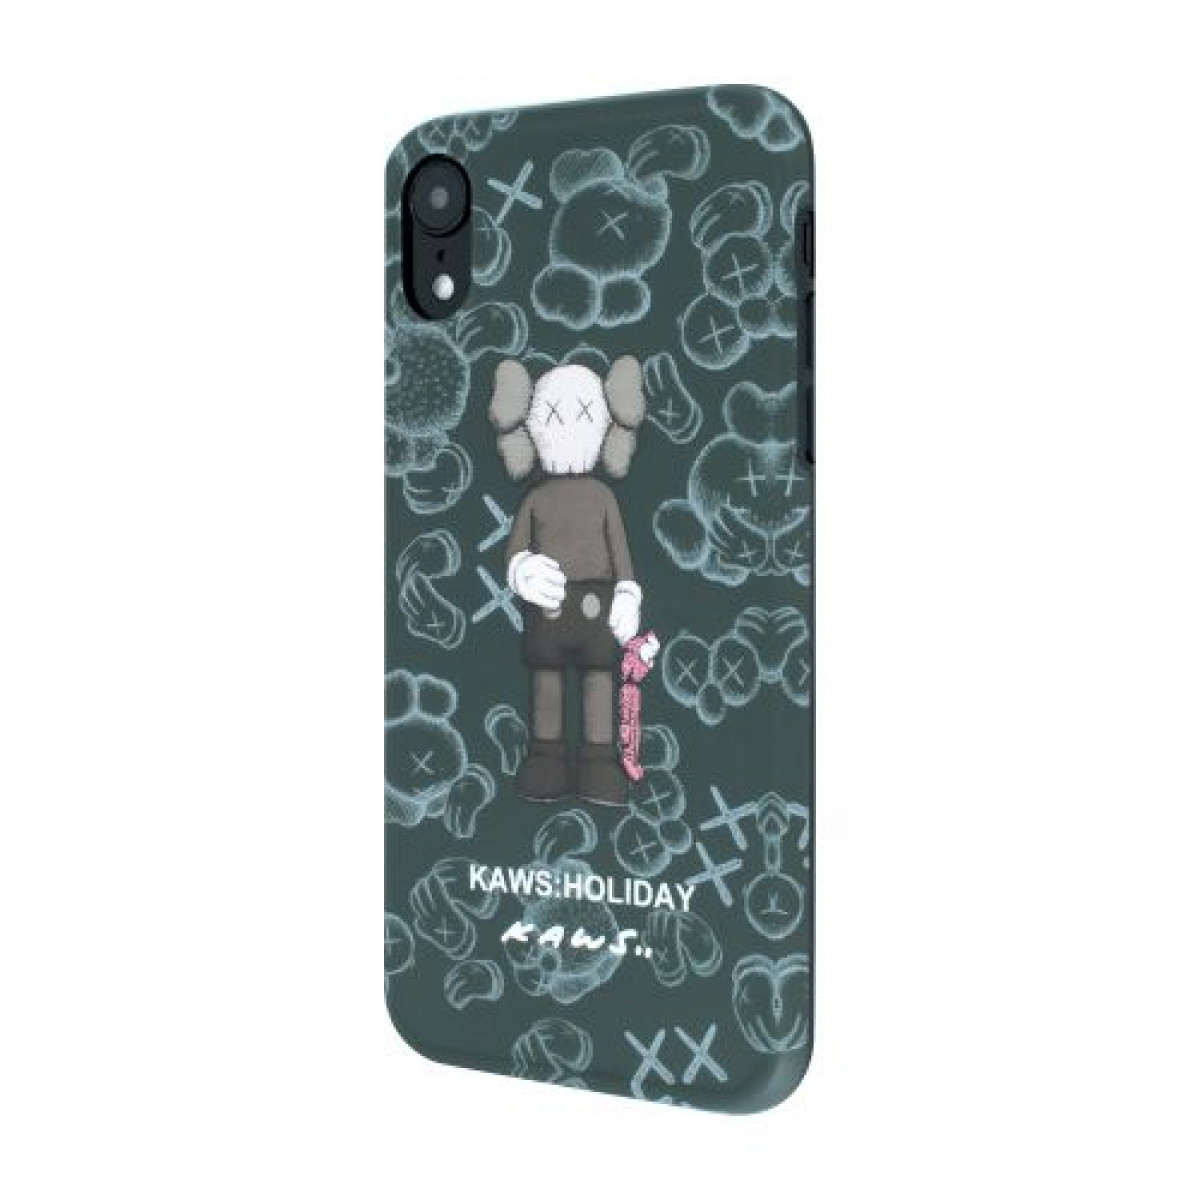 IMD Print Kaws Holiday Case for iPhone XR